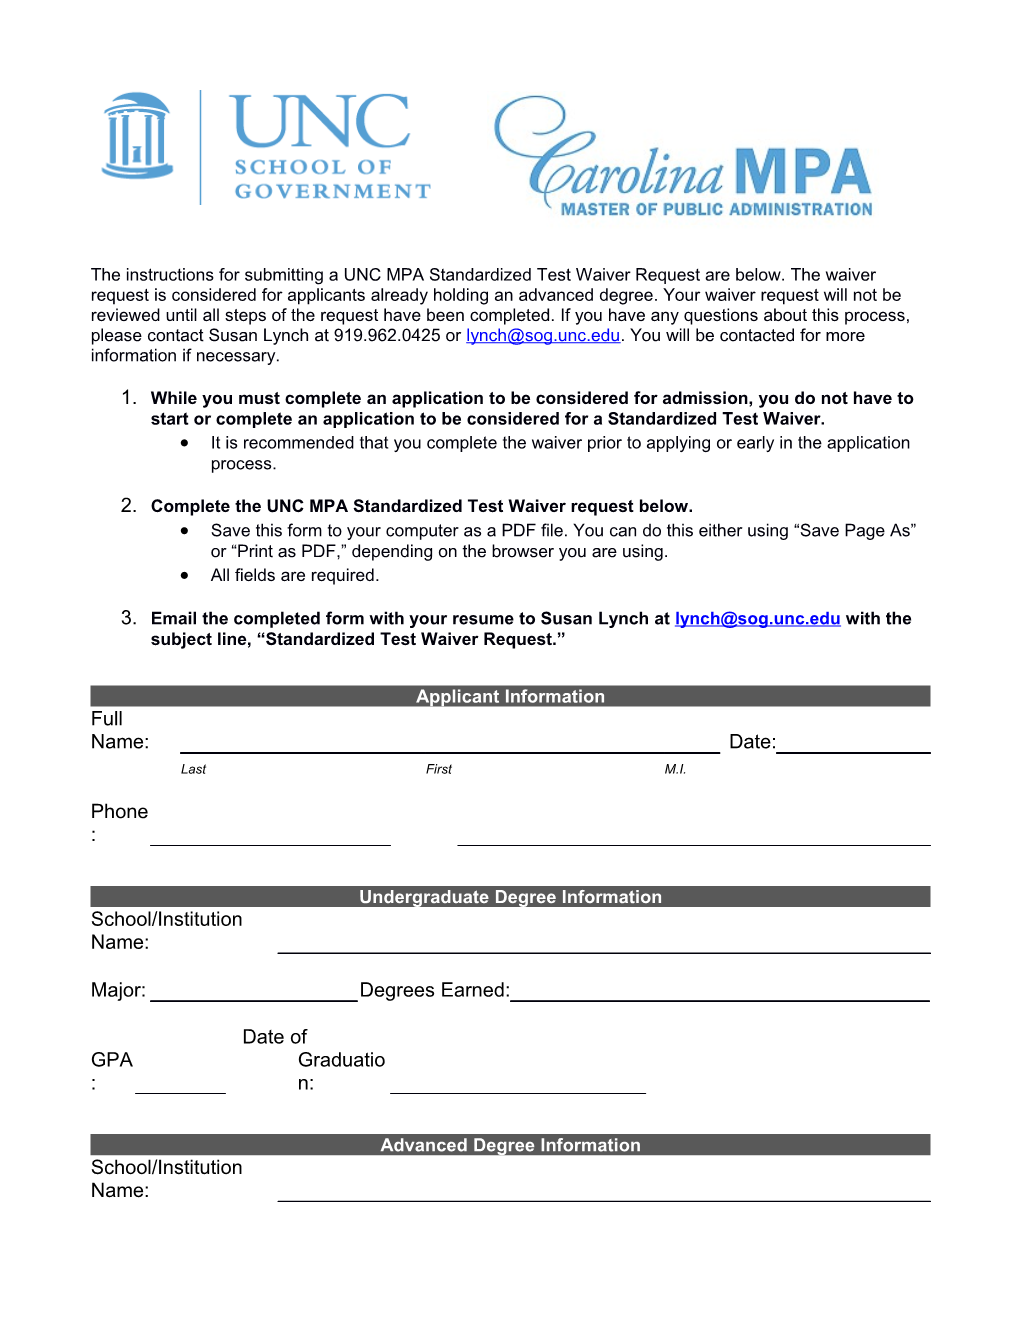 The Instructions for Submitting a UNC MPA Standardized Test Waiver Request Are Below. The